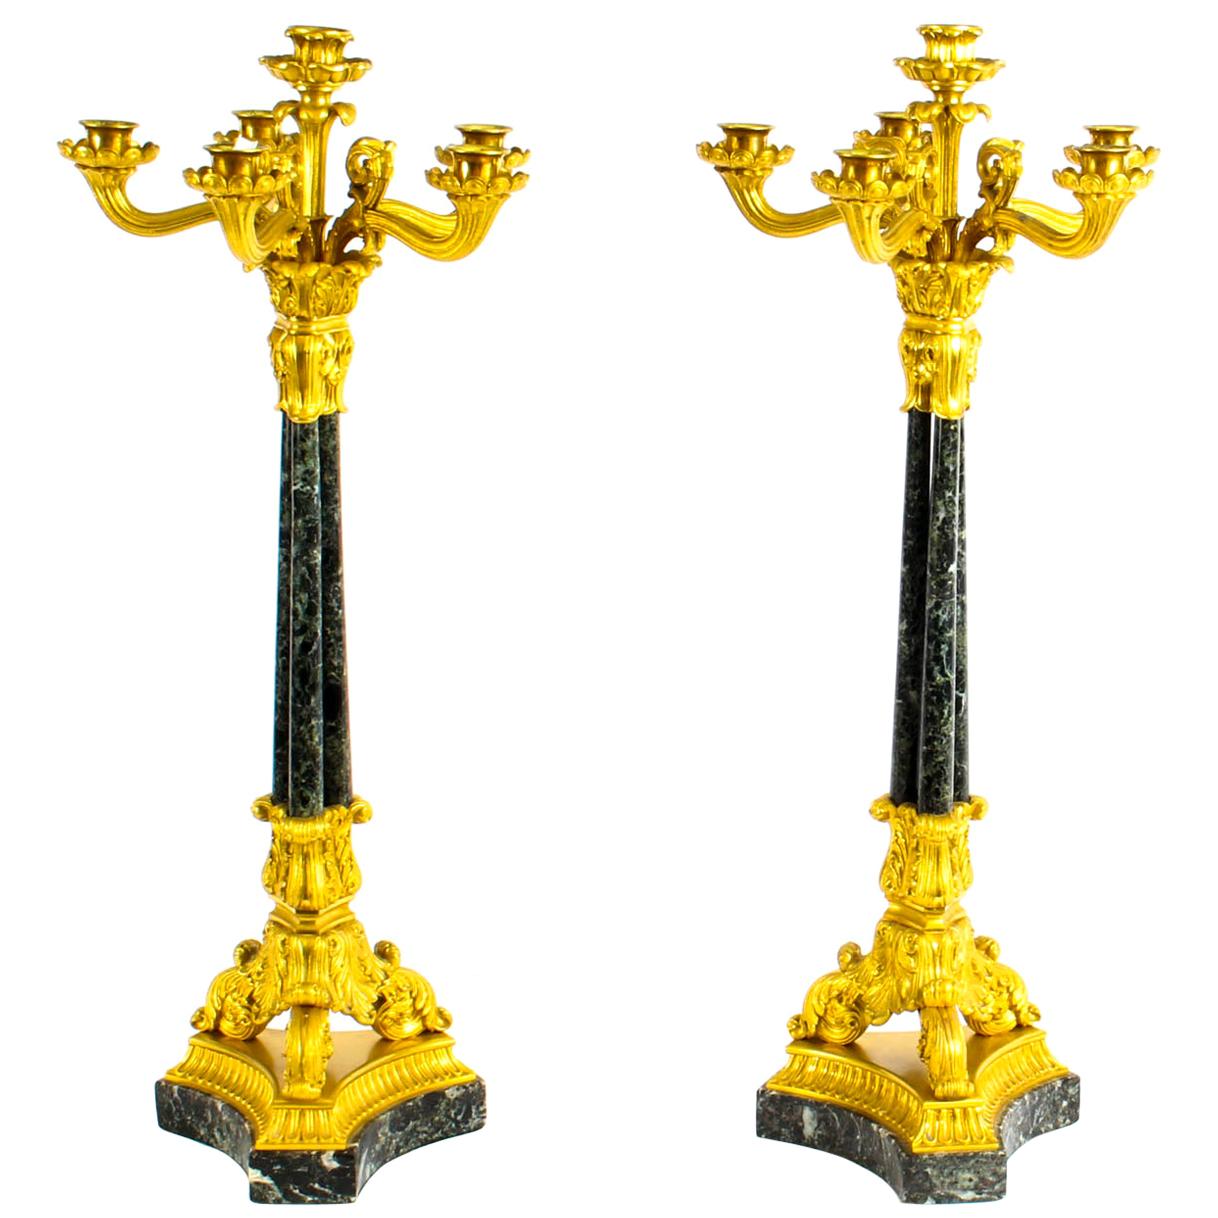 Antique Pair of French Ormolu and Marble Candelabra, 19th Century